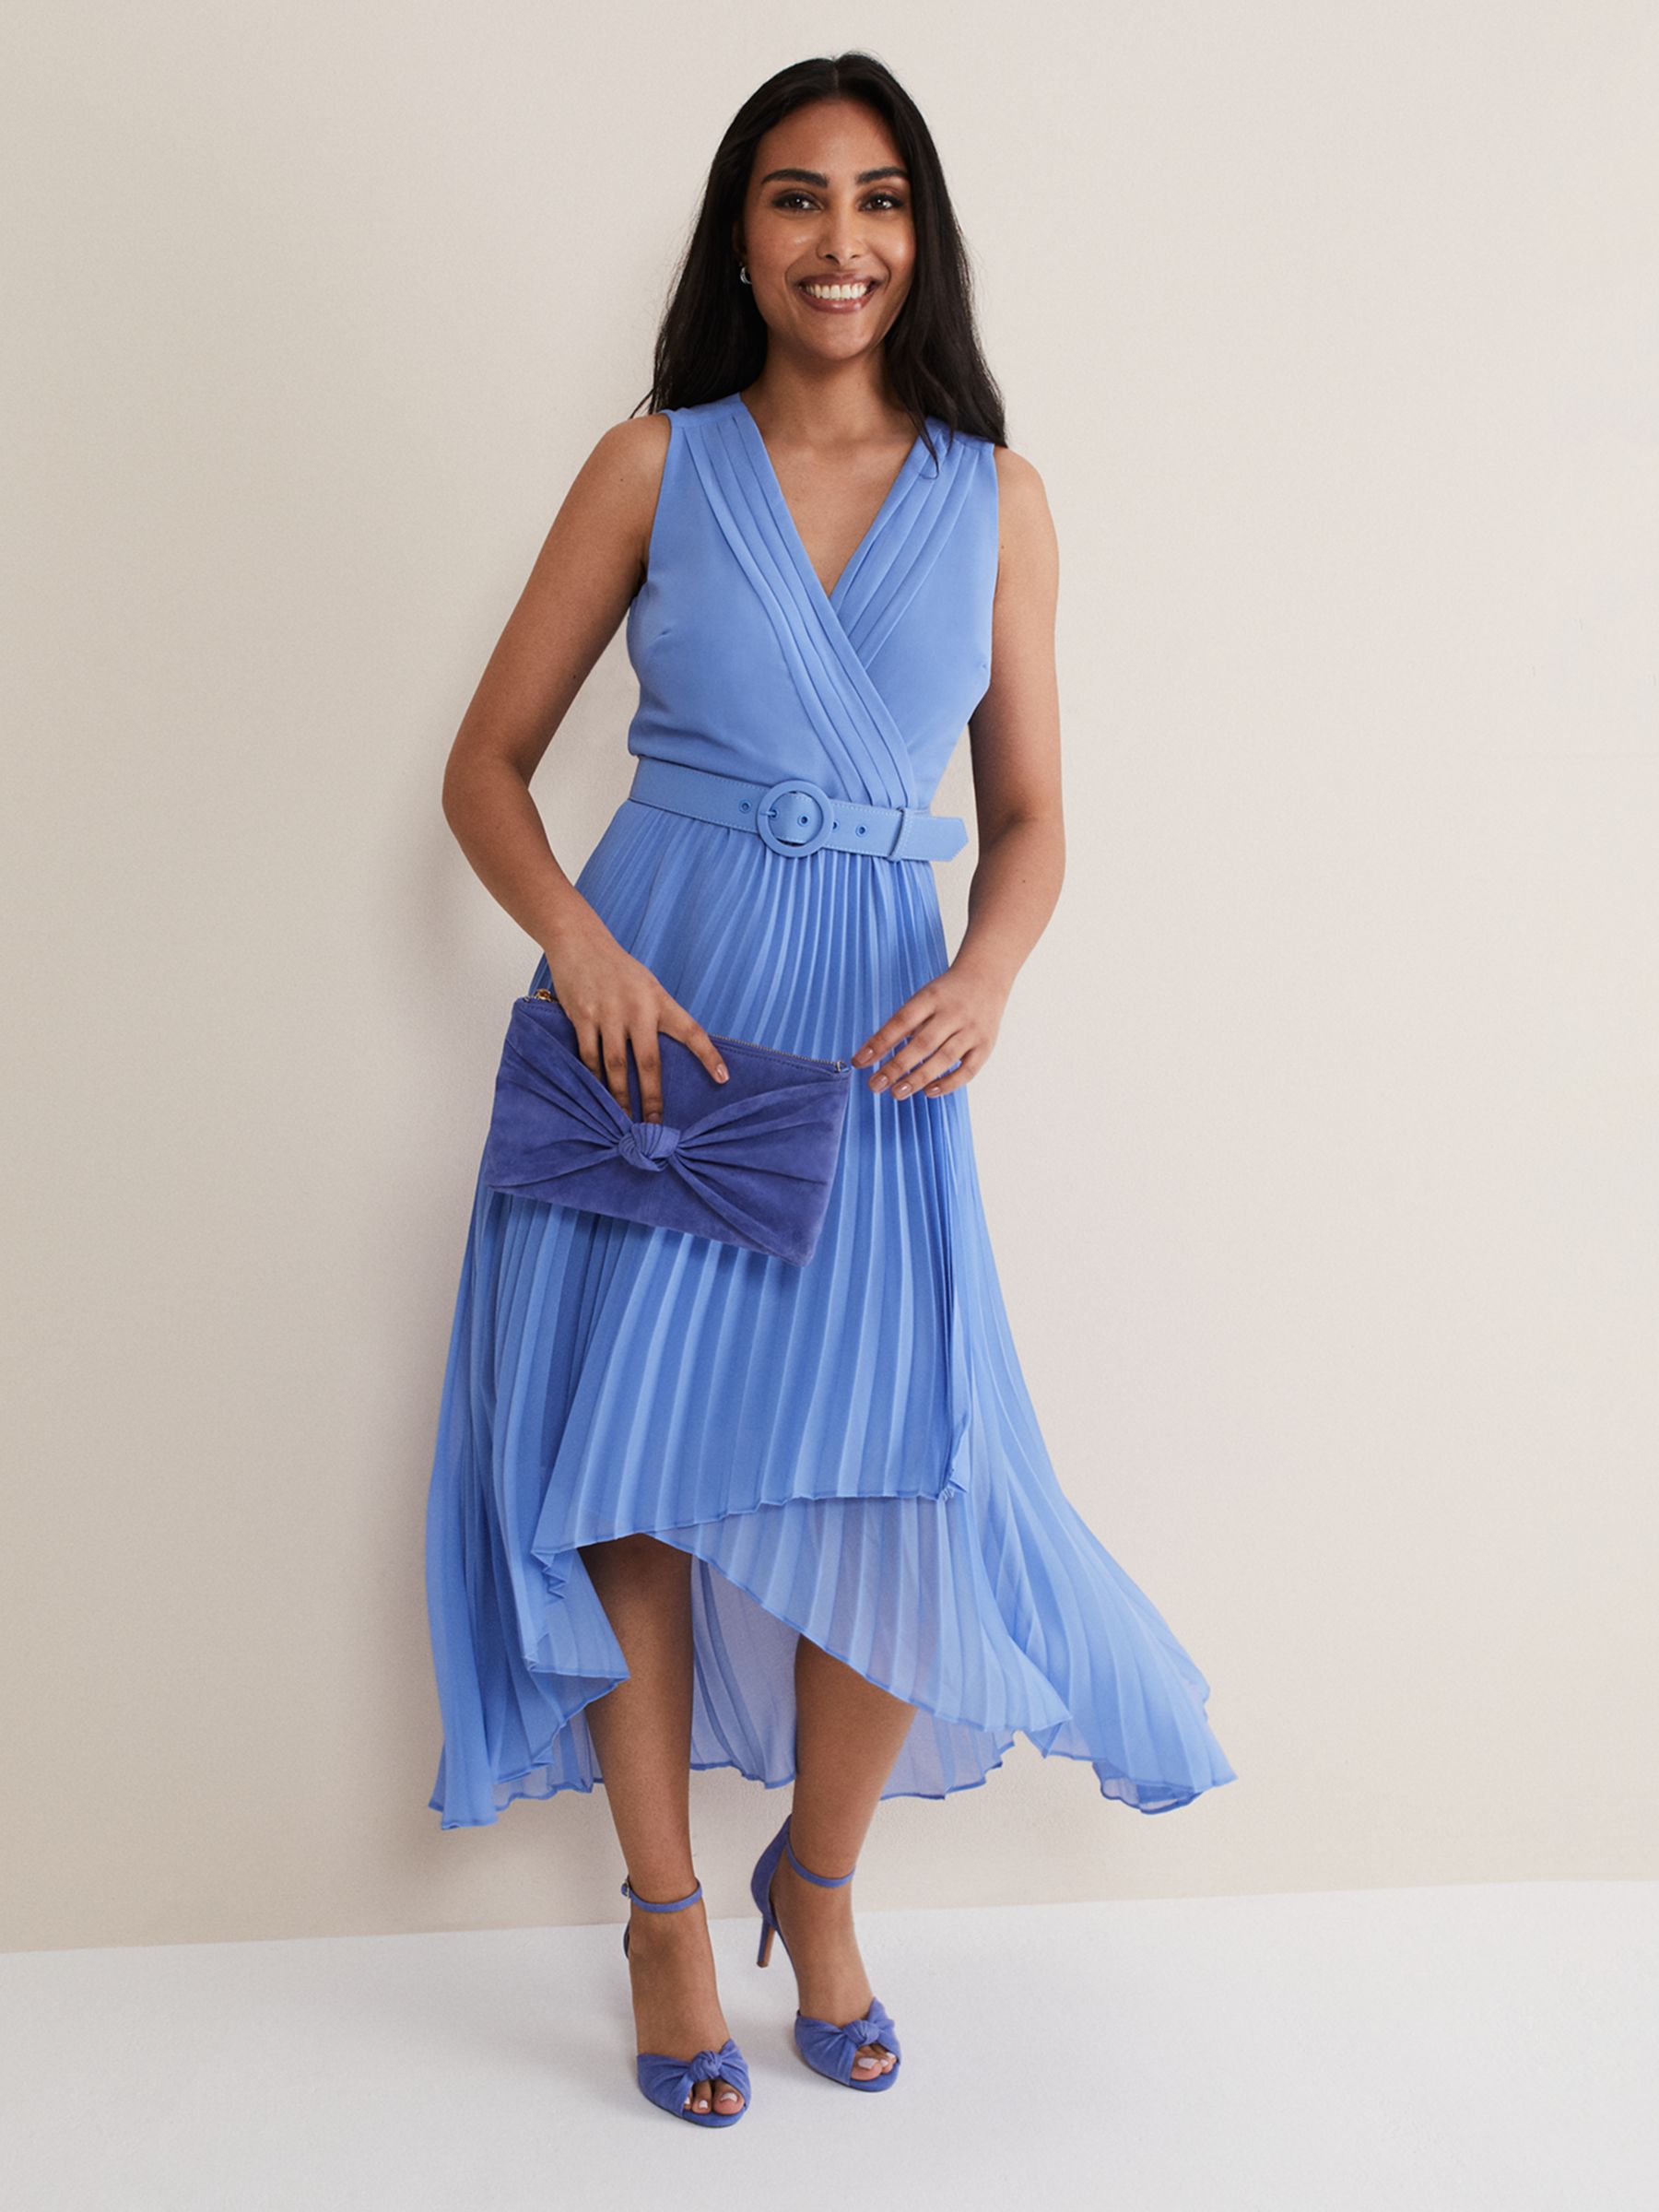 Women's Petite Clothing, Petite Dresses, Jumpsuits & More, Phase Eight